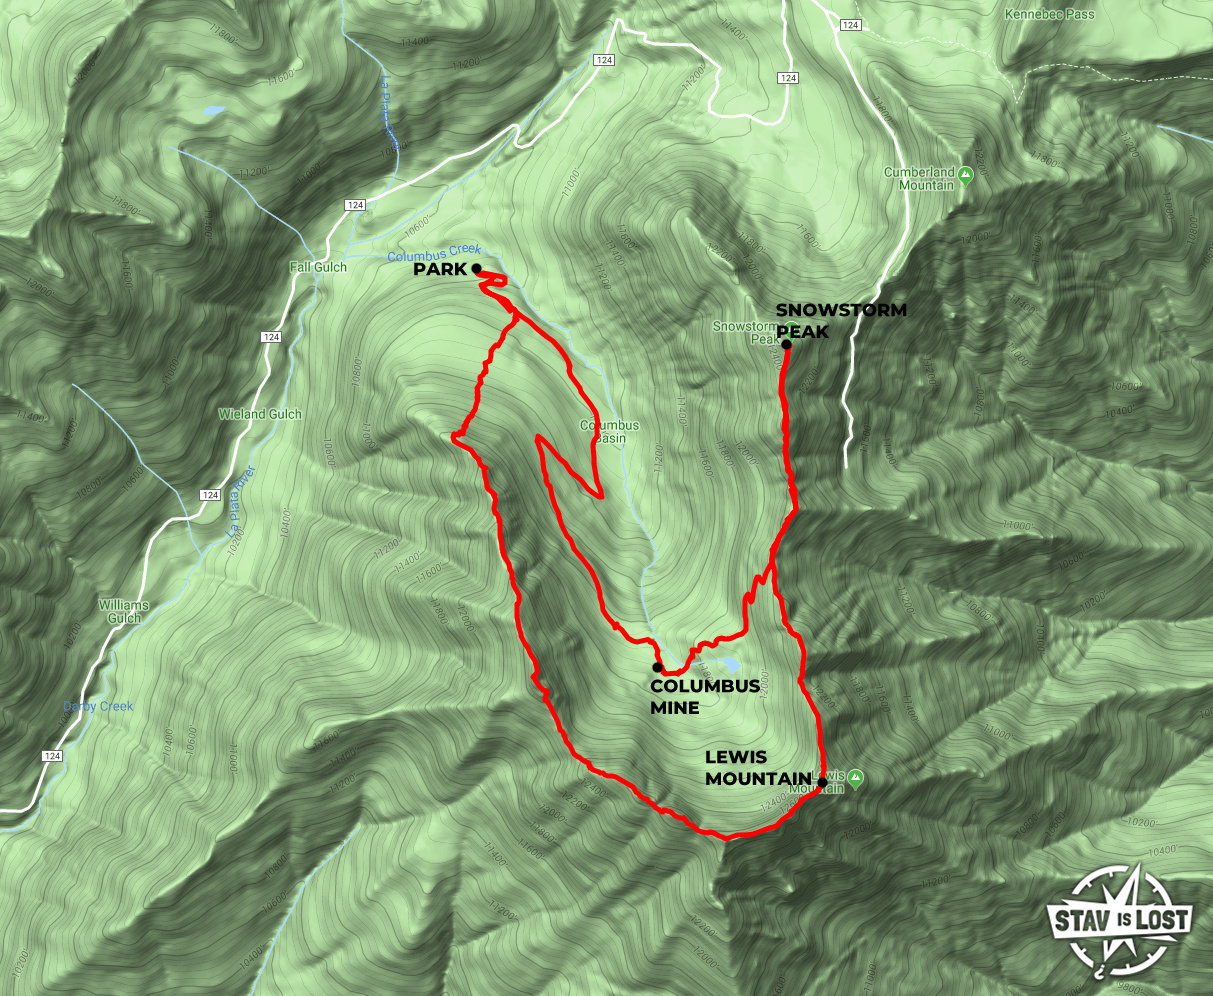 map for Lewis Mountain, Snowstorm Peak, and Columbus Mine Loop by stav is lost